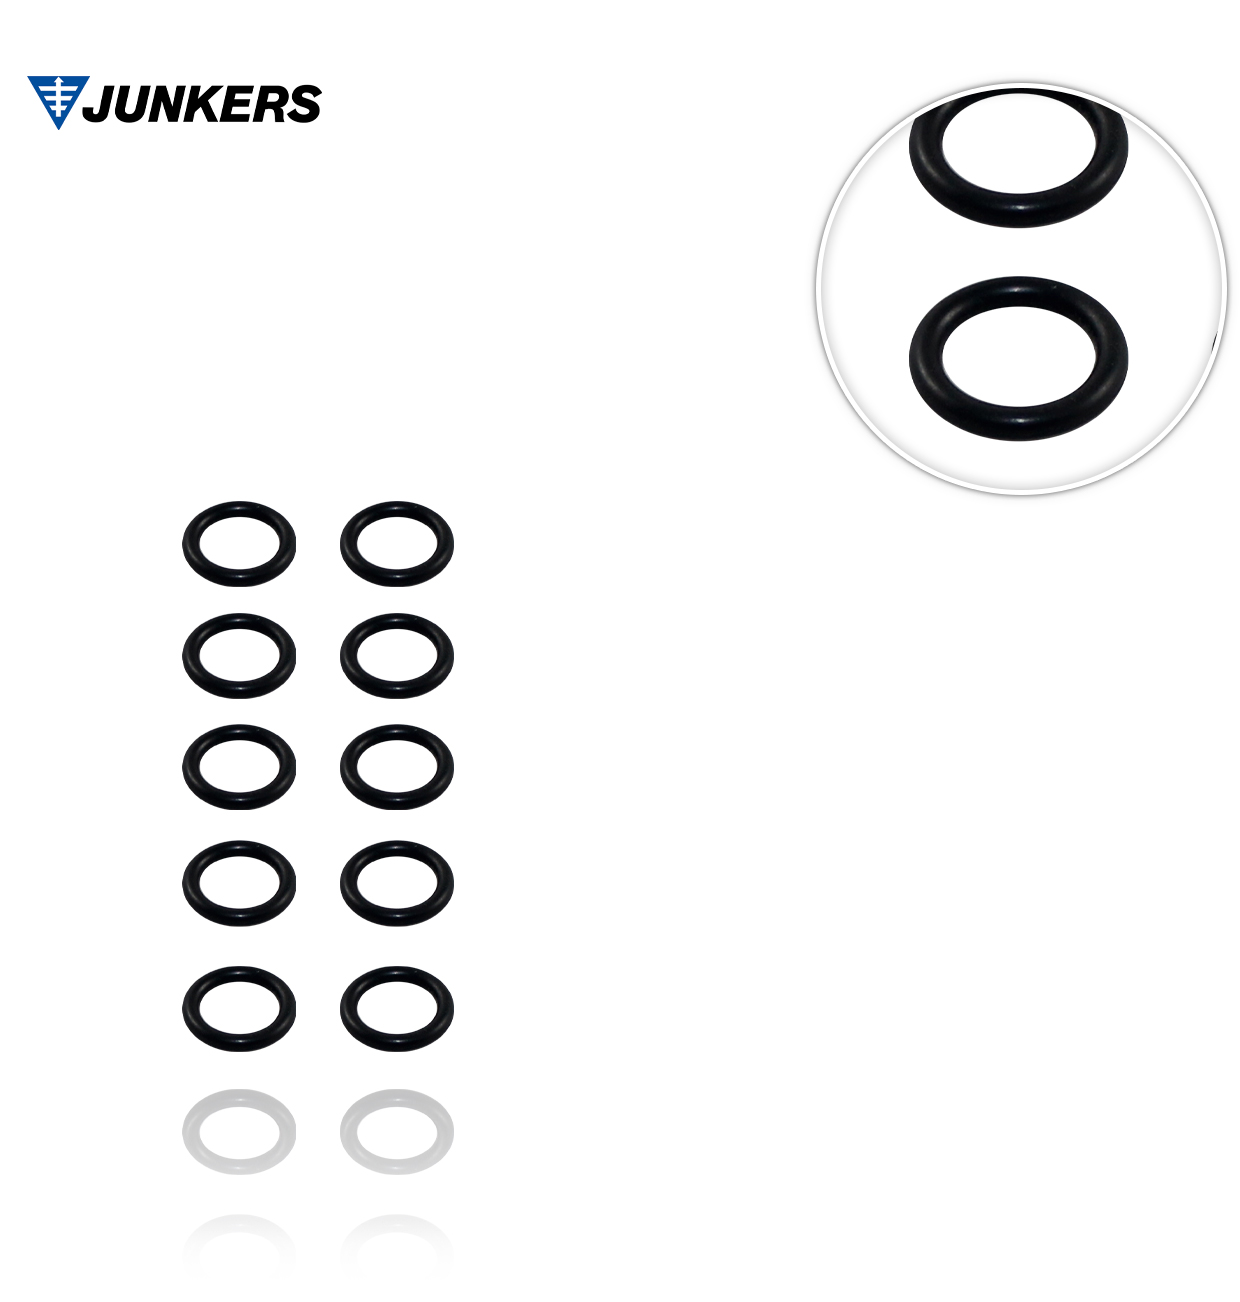 JUNKERS 8710205060 O-RING (10 units)